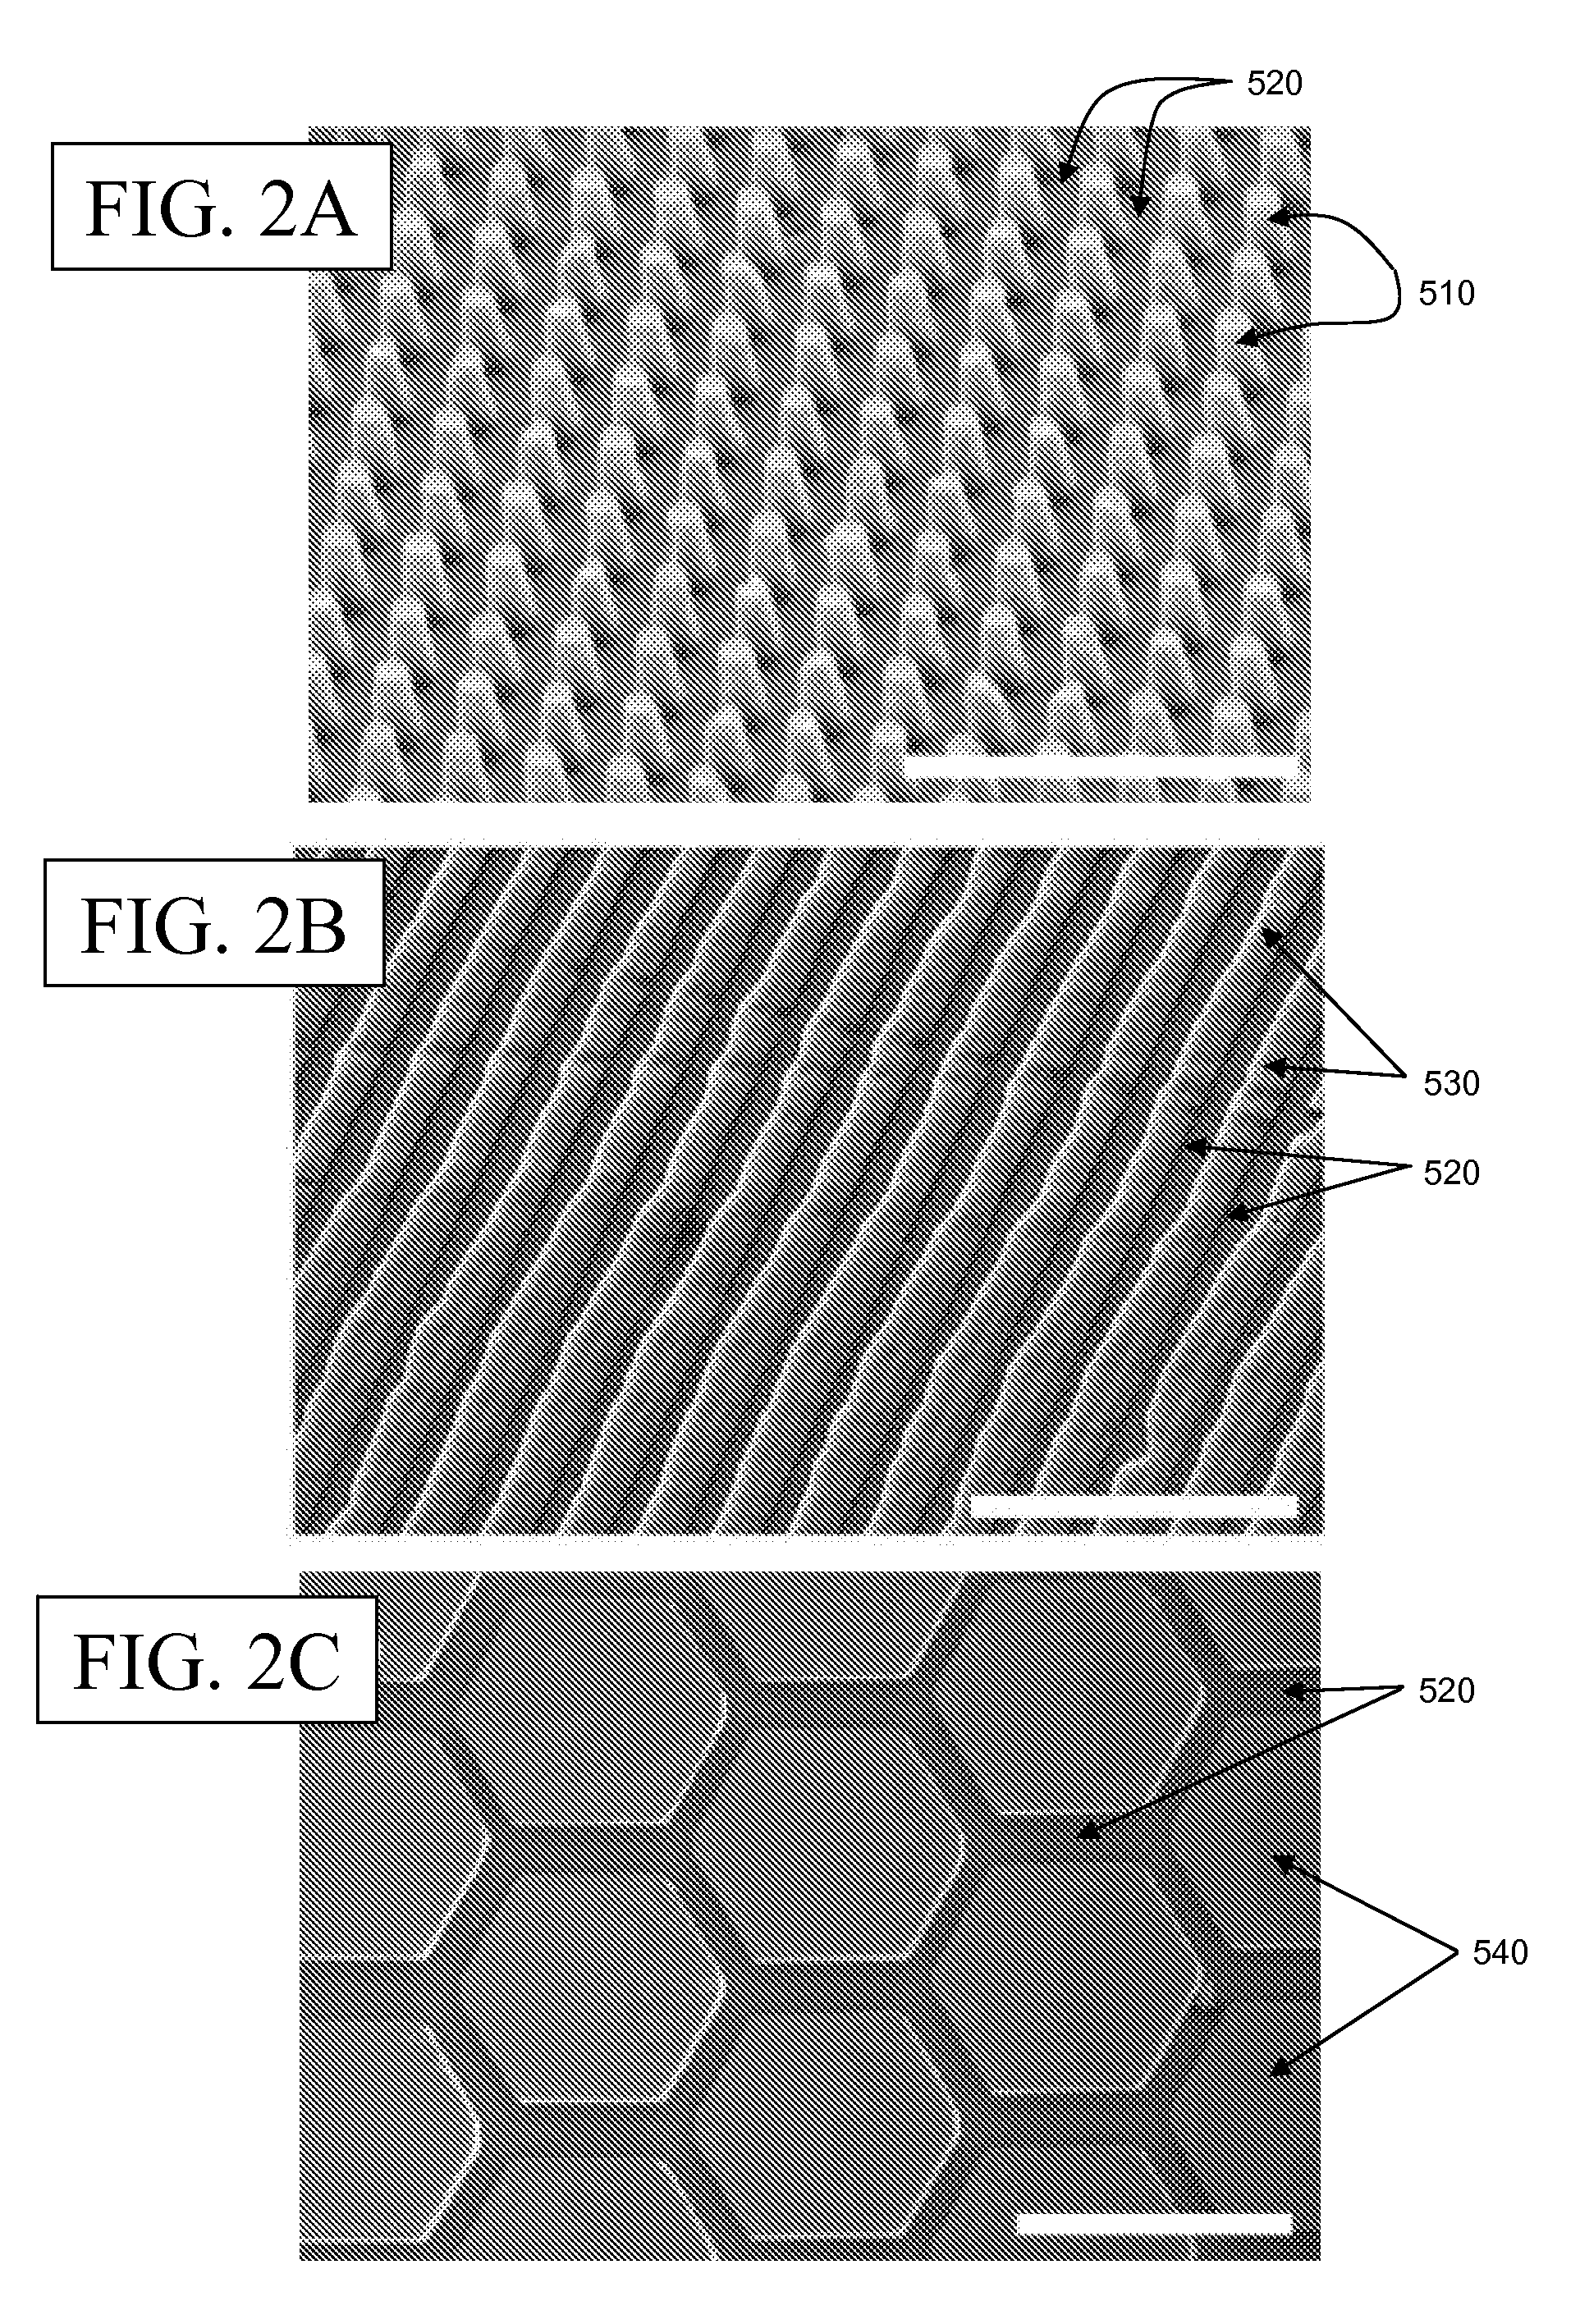 Microfluidic device comprising silk films coupled to form a microchannel